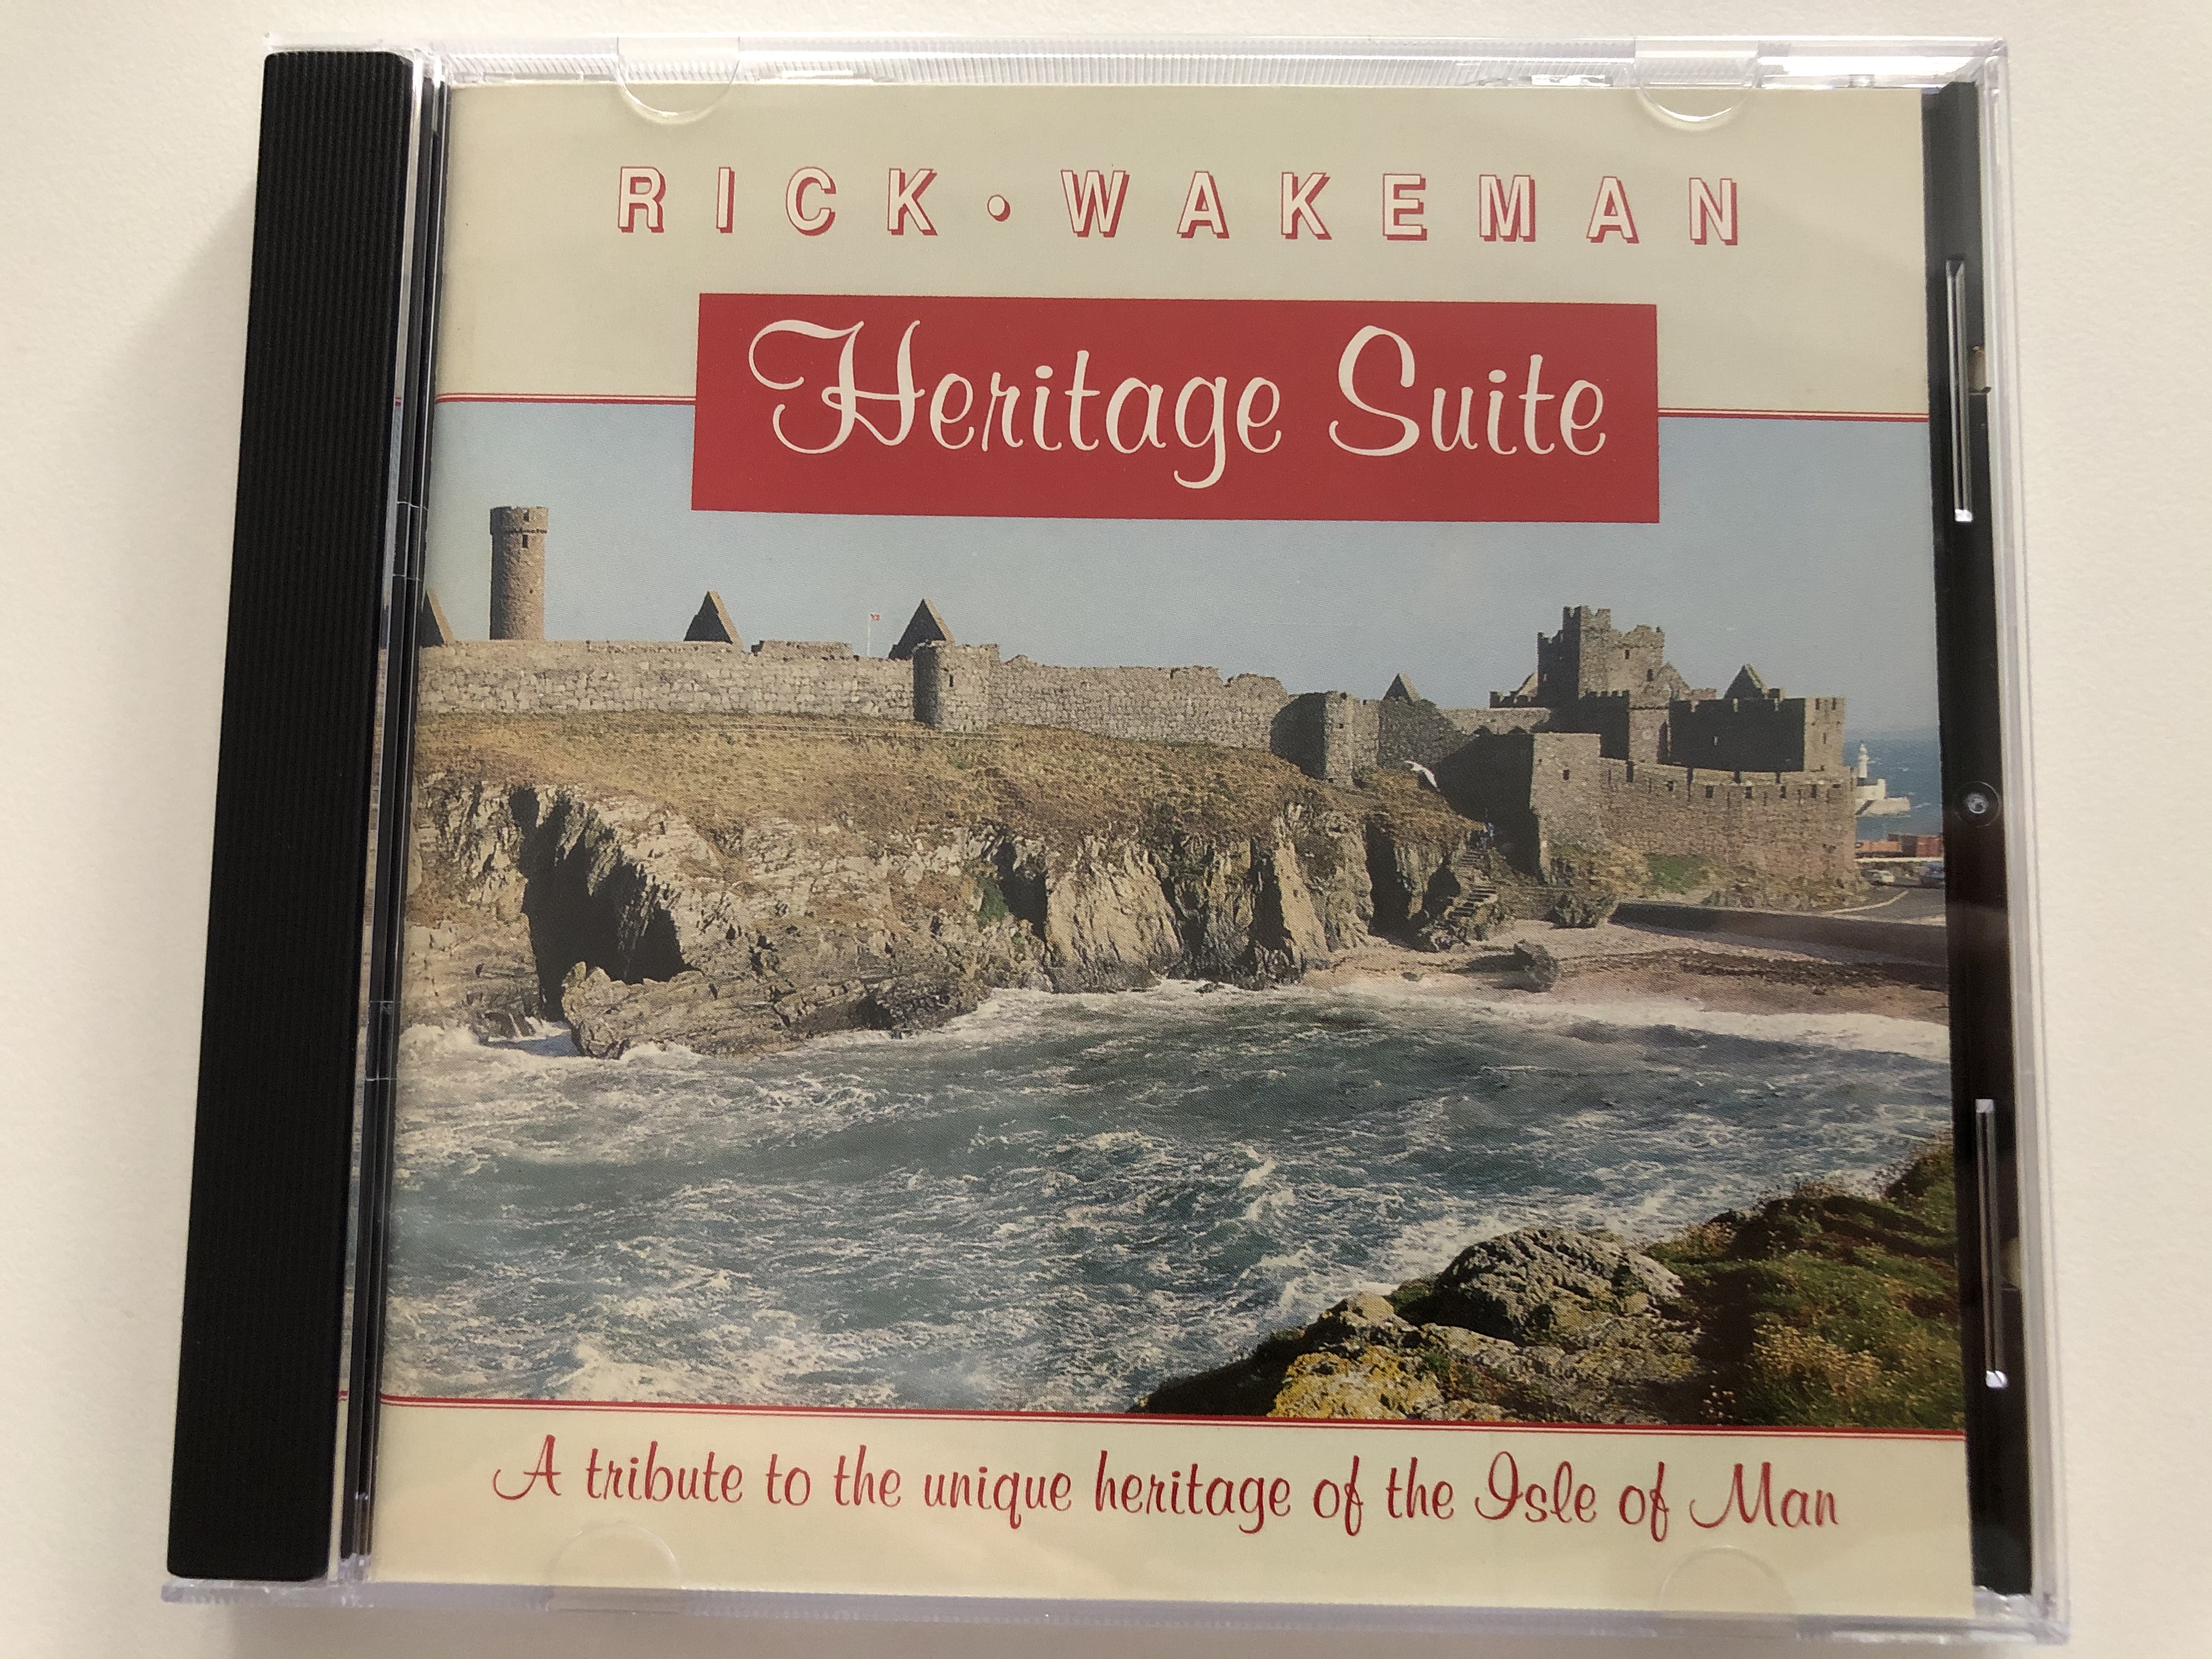 rick-wakeman-heritage-suite-a-tribute-to-the-unique-heritage-of-the-isle-of-man-president-records-audio-cd-1993-rwcd-16-1-.jpg